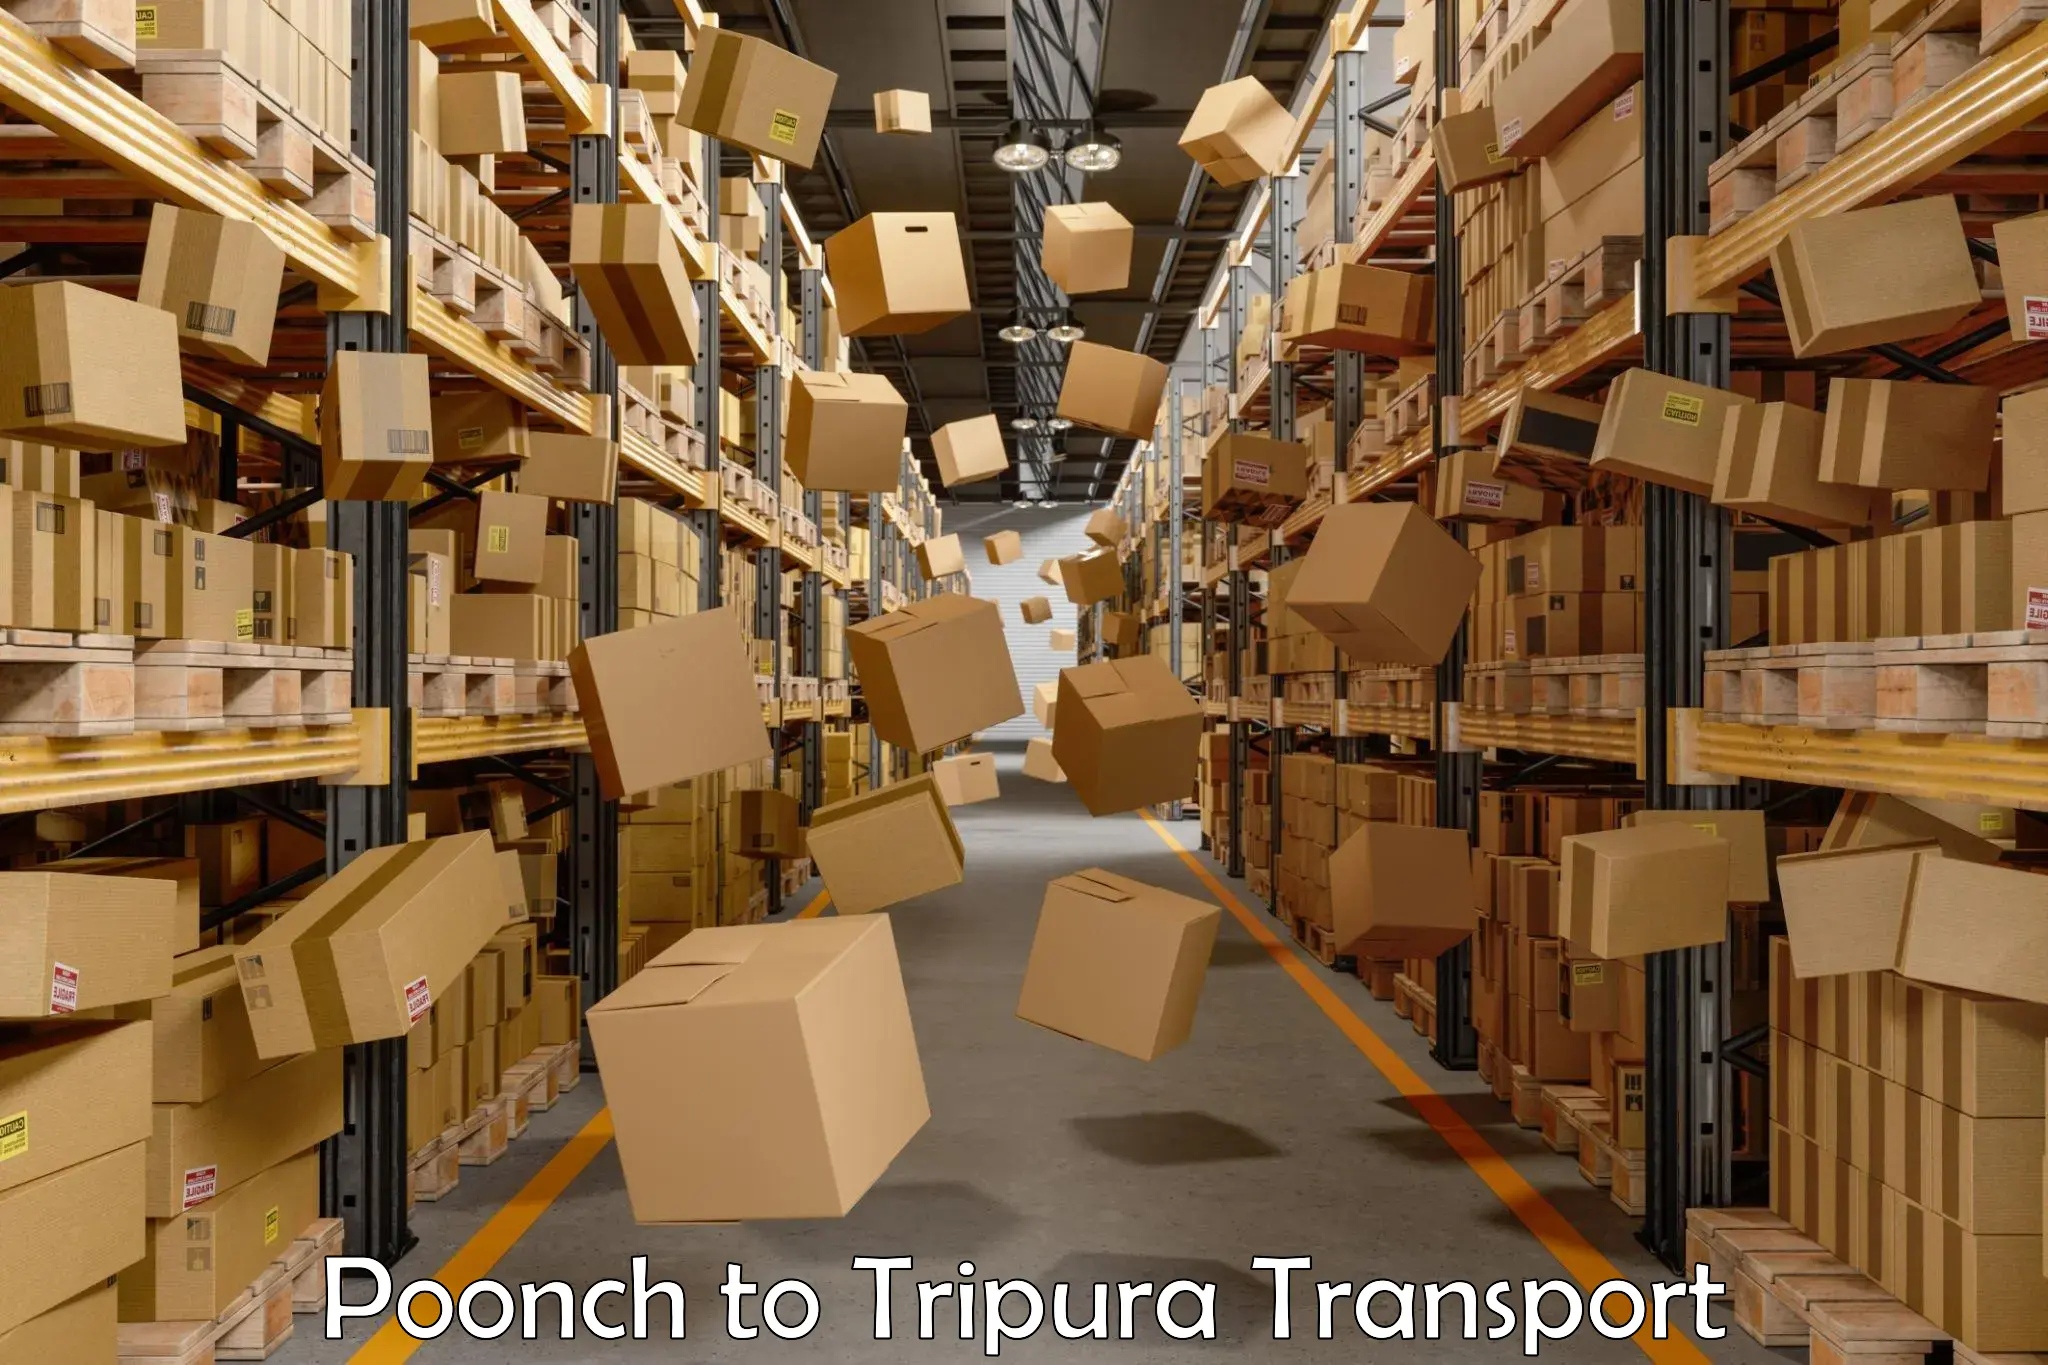 Shipping partner Poonch to Udaipur Tripura